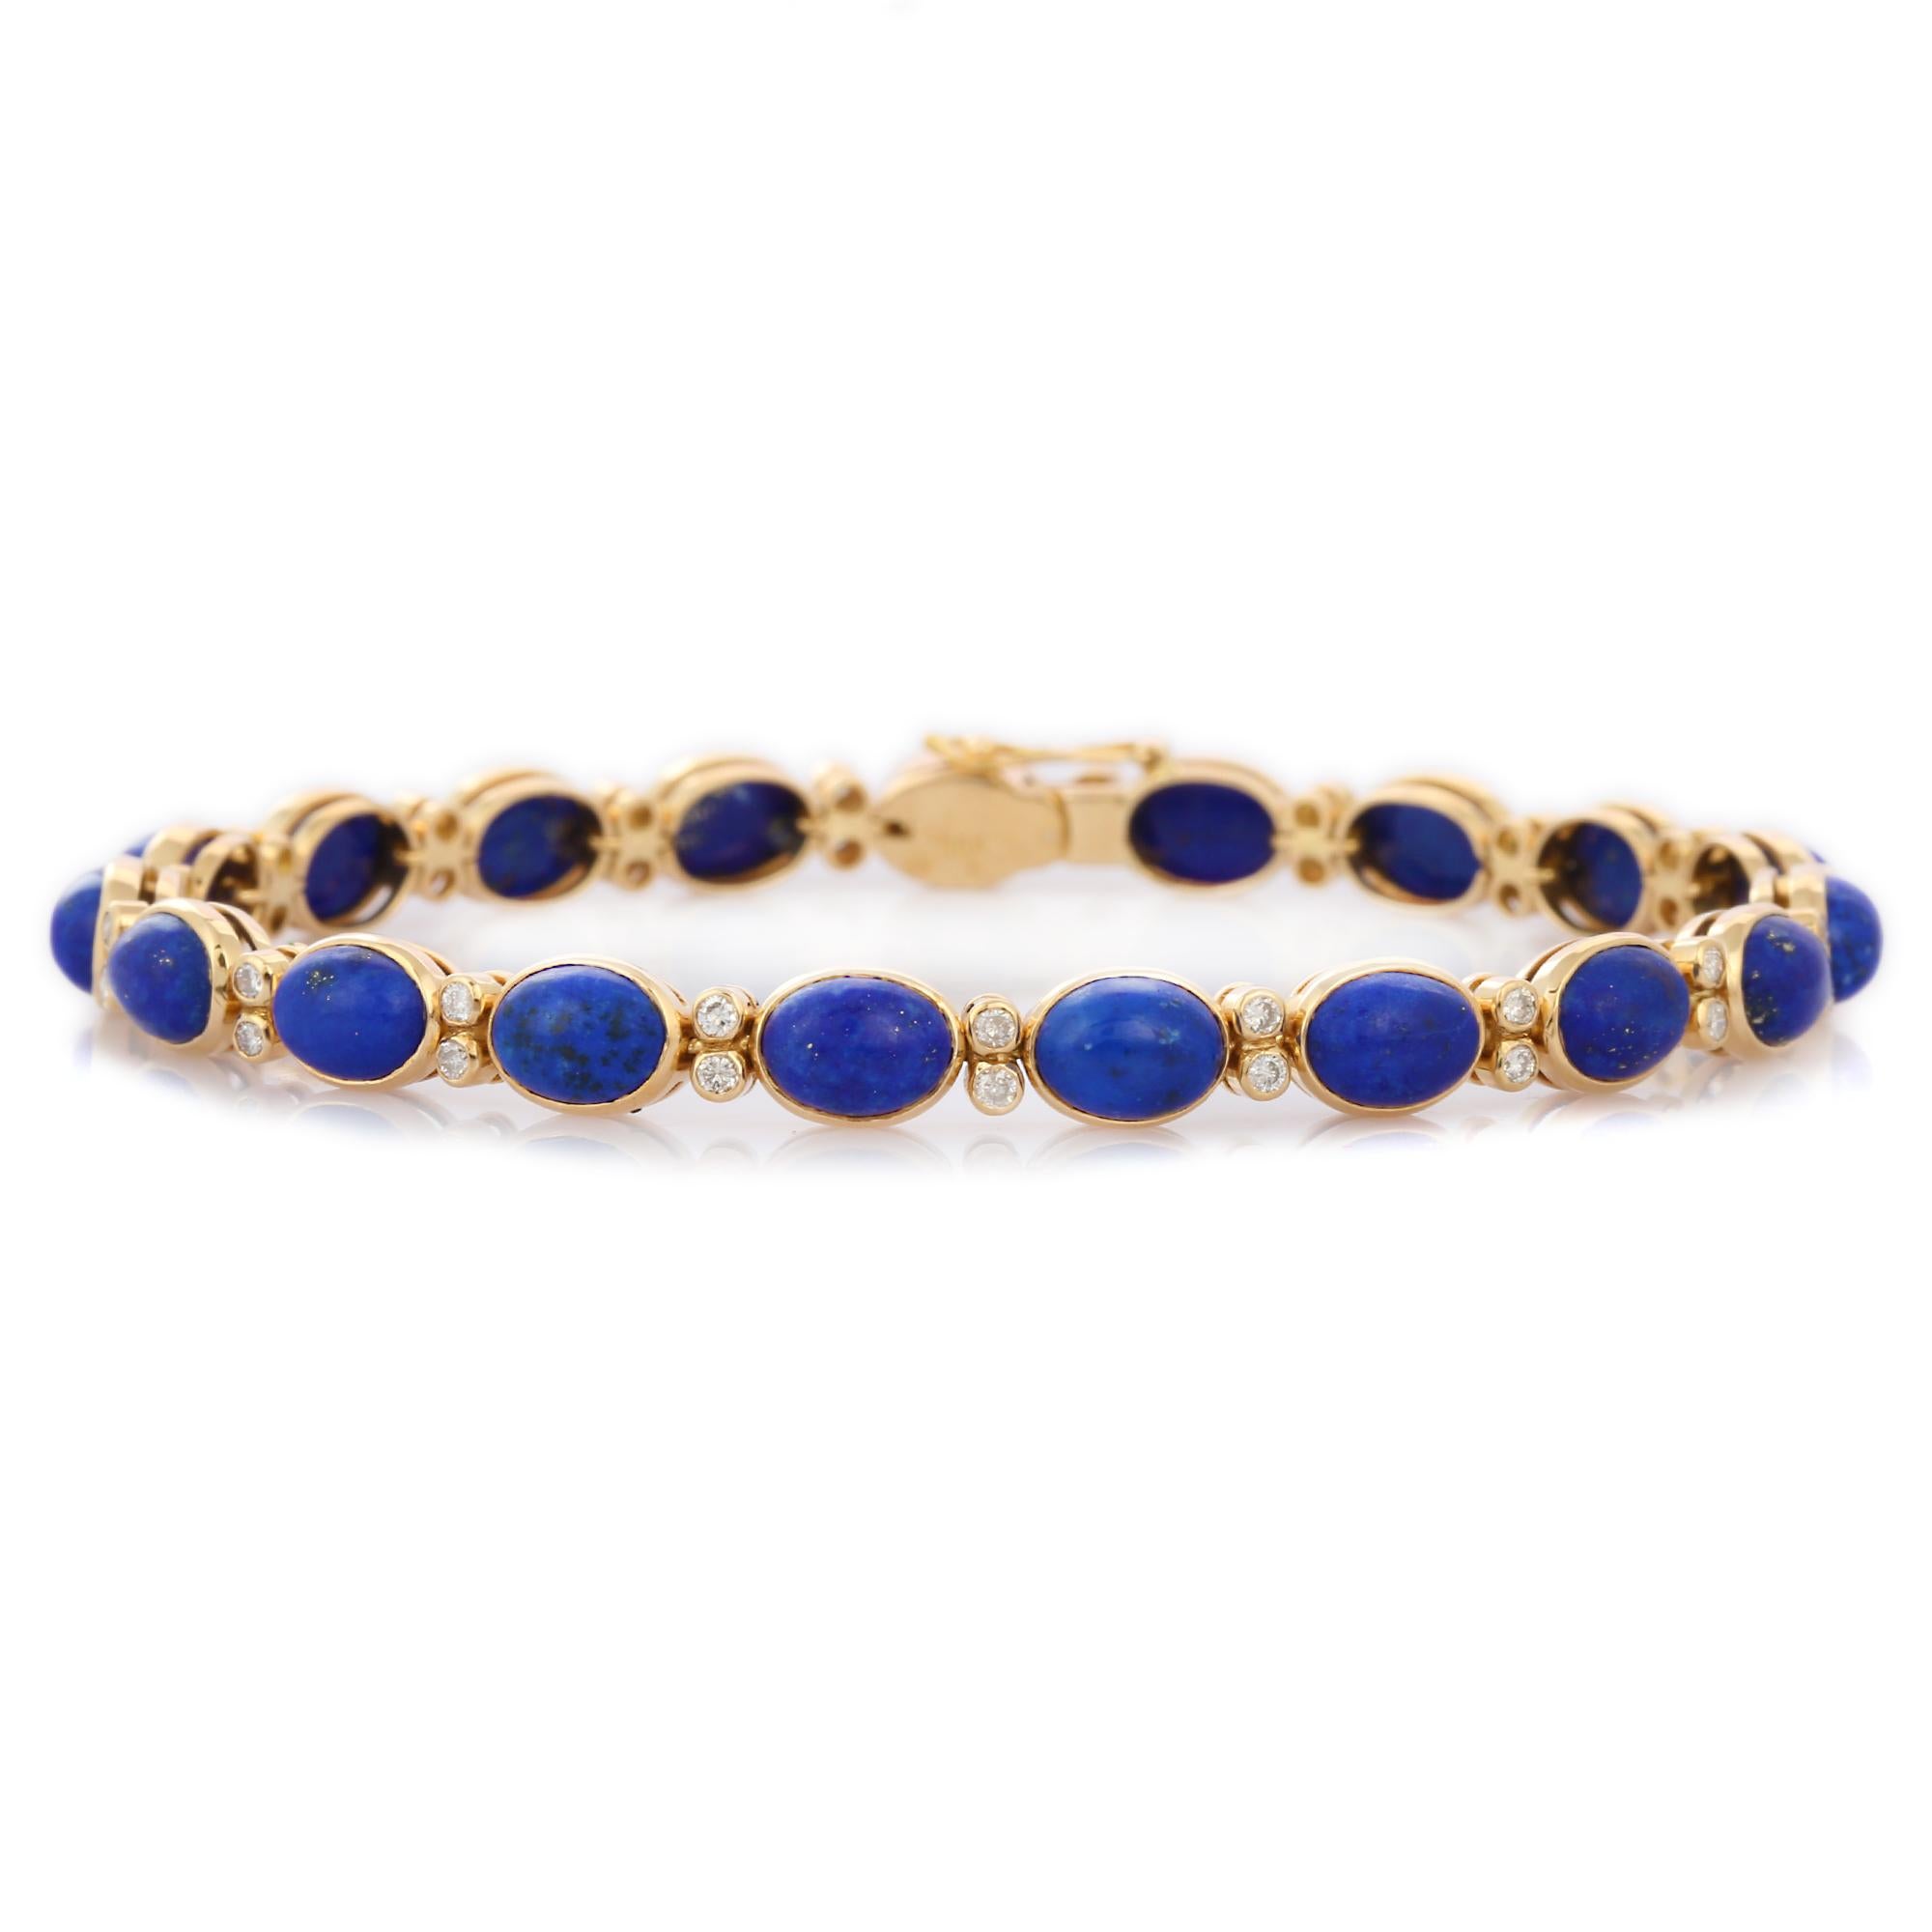 Women's Oval Cut 17.45 Ct Lapis and Diamond Tennis Bracelet in 18K Yellow Gold For Sale